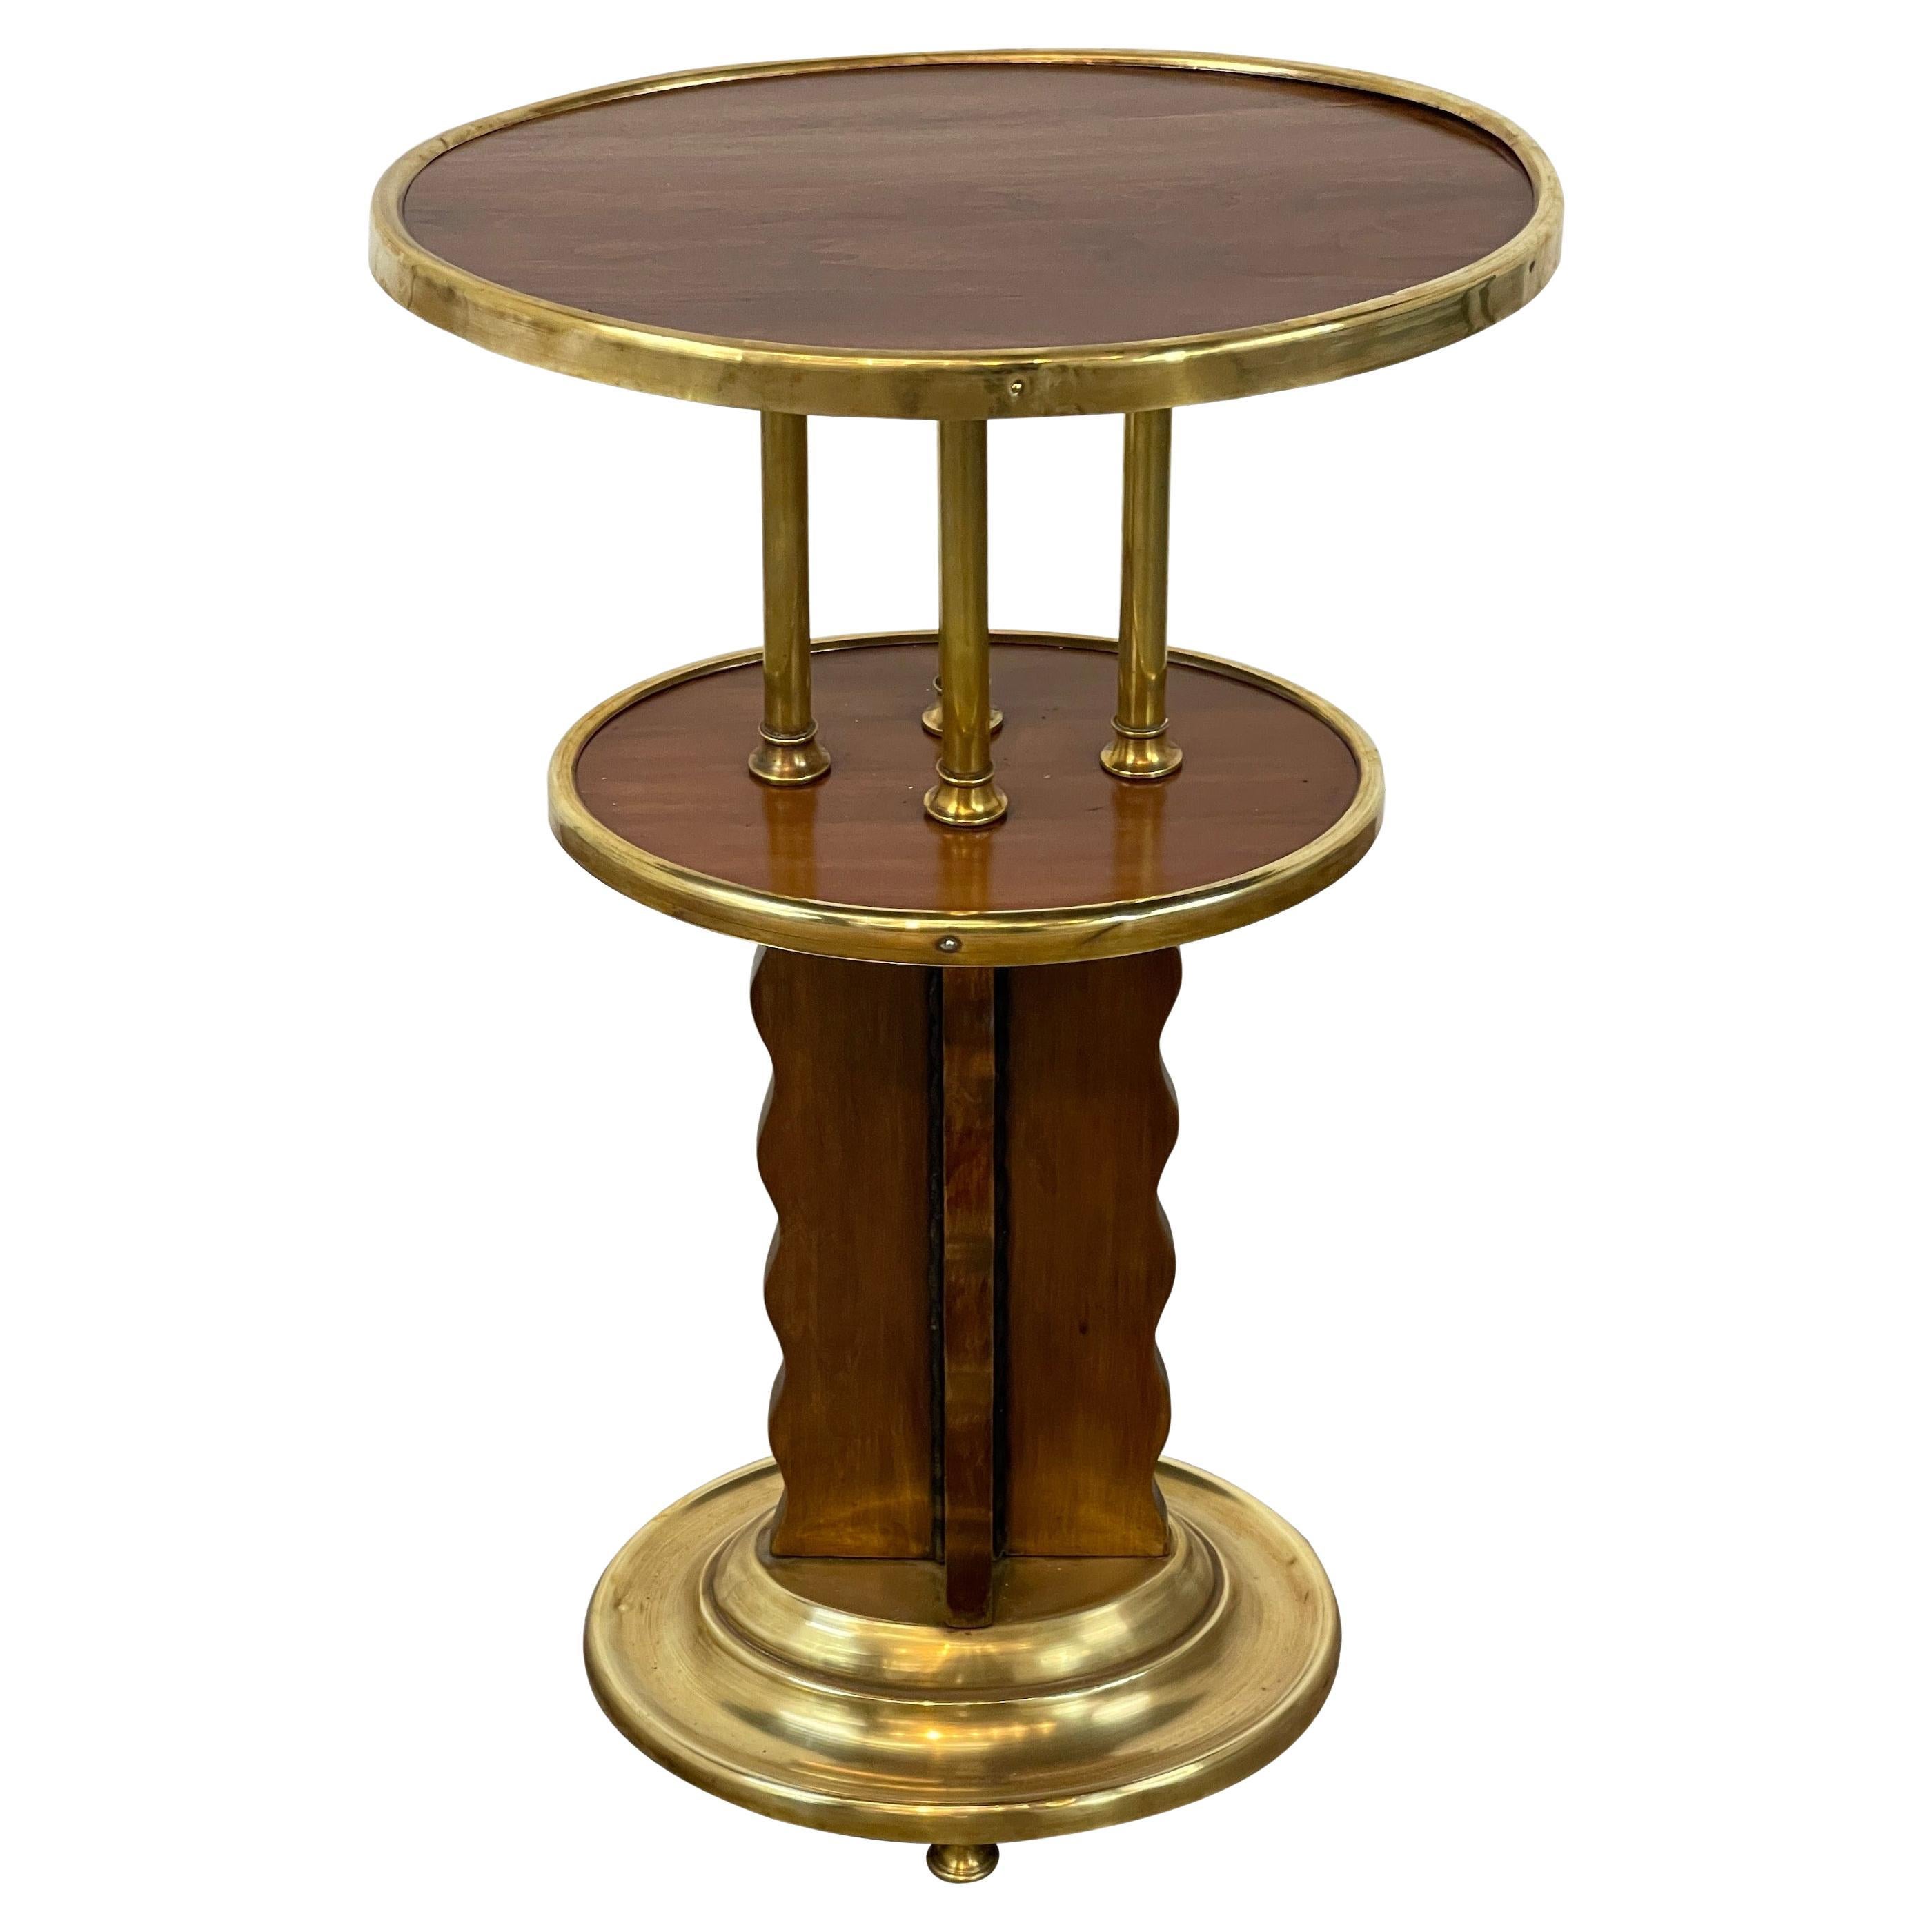 Viennese Secession Brass Mounted Hardwood Side Table, Austria C. 1920 For Sale